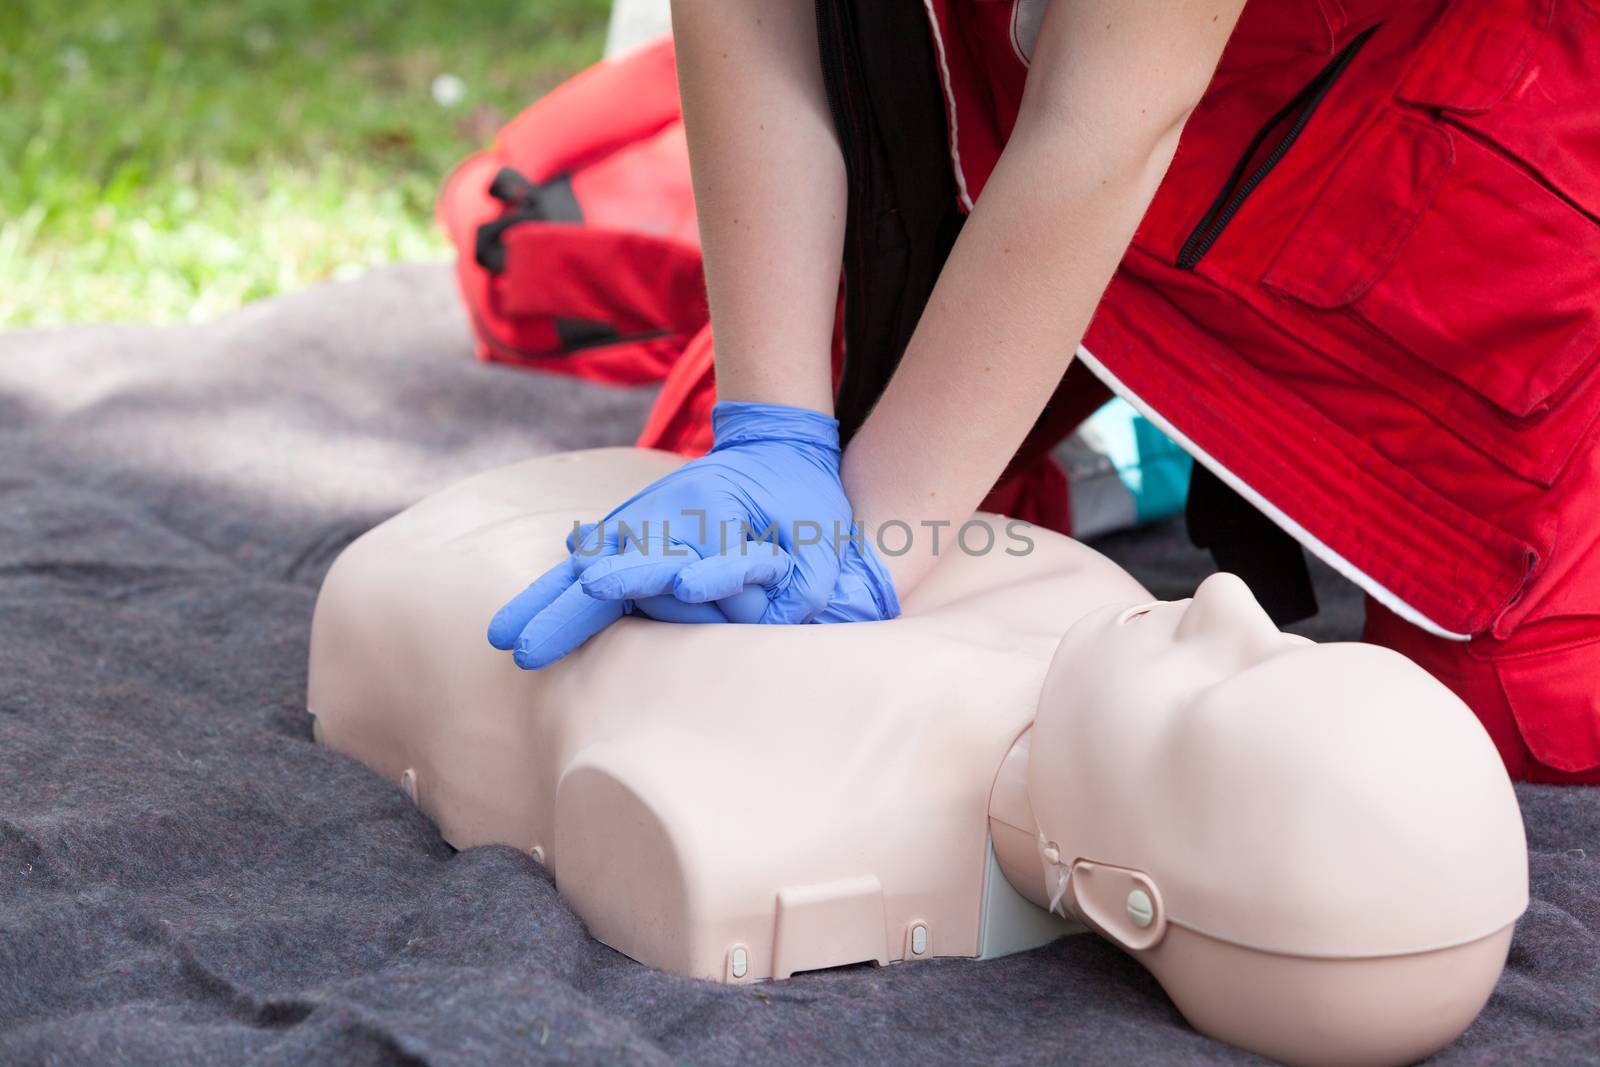 Paramedic demonstrate Cardiopulmonary resuscitation (CPR) on dumy by wellphoto